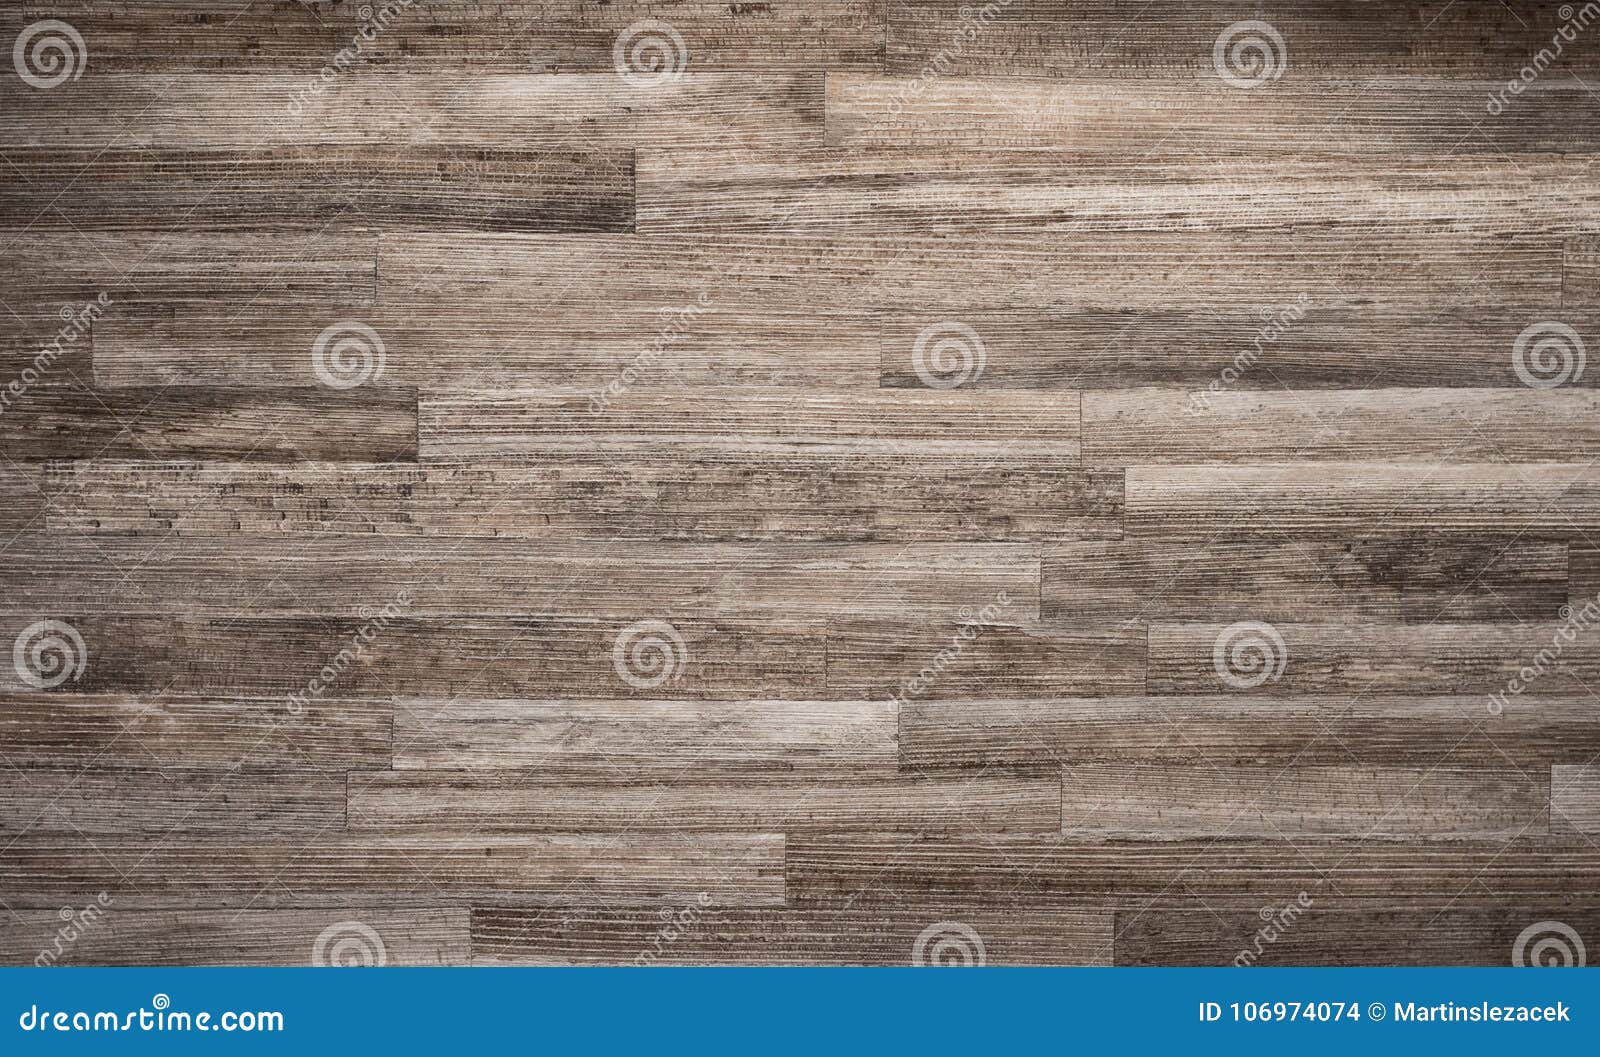 Wooden Desk Texture, Brown Wood Material and Surface, Nature Construction Material Stock Photo - of material, backdrop: 106974074